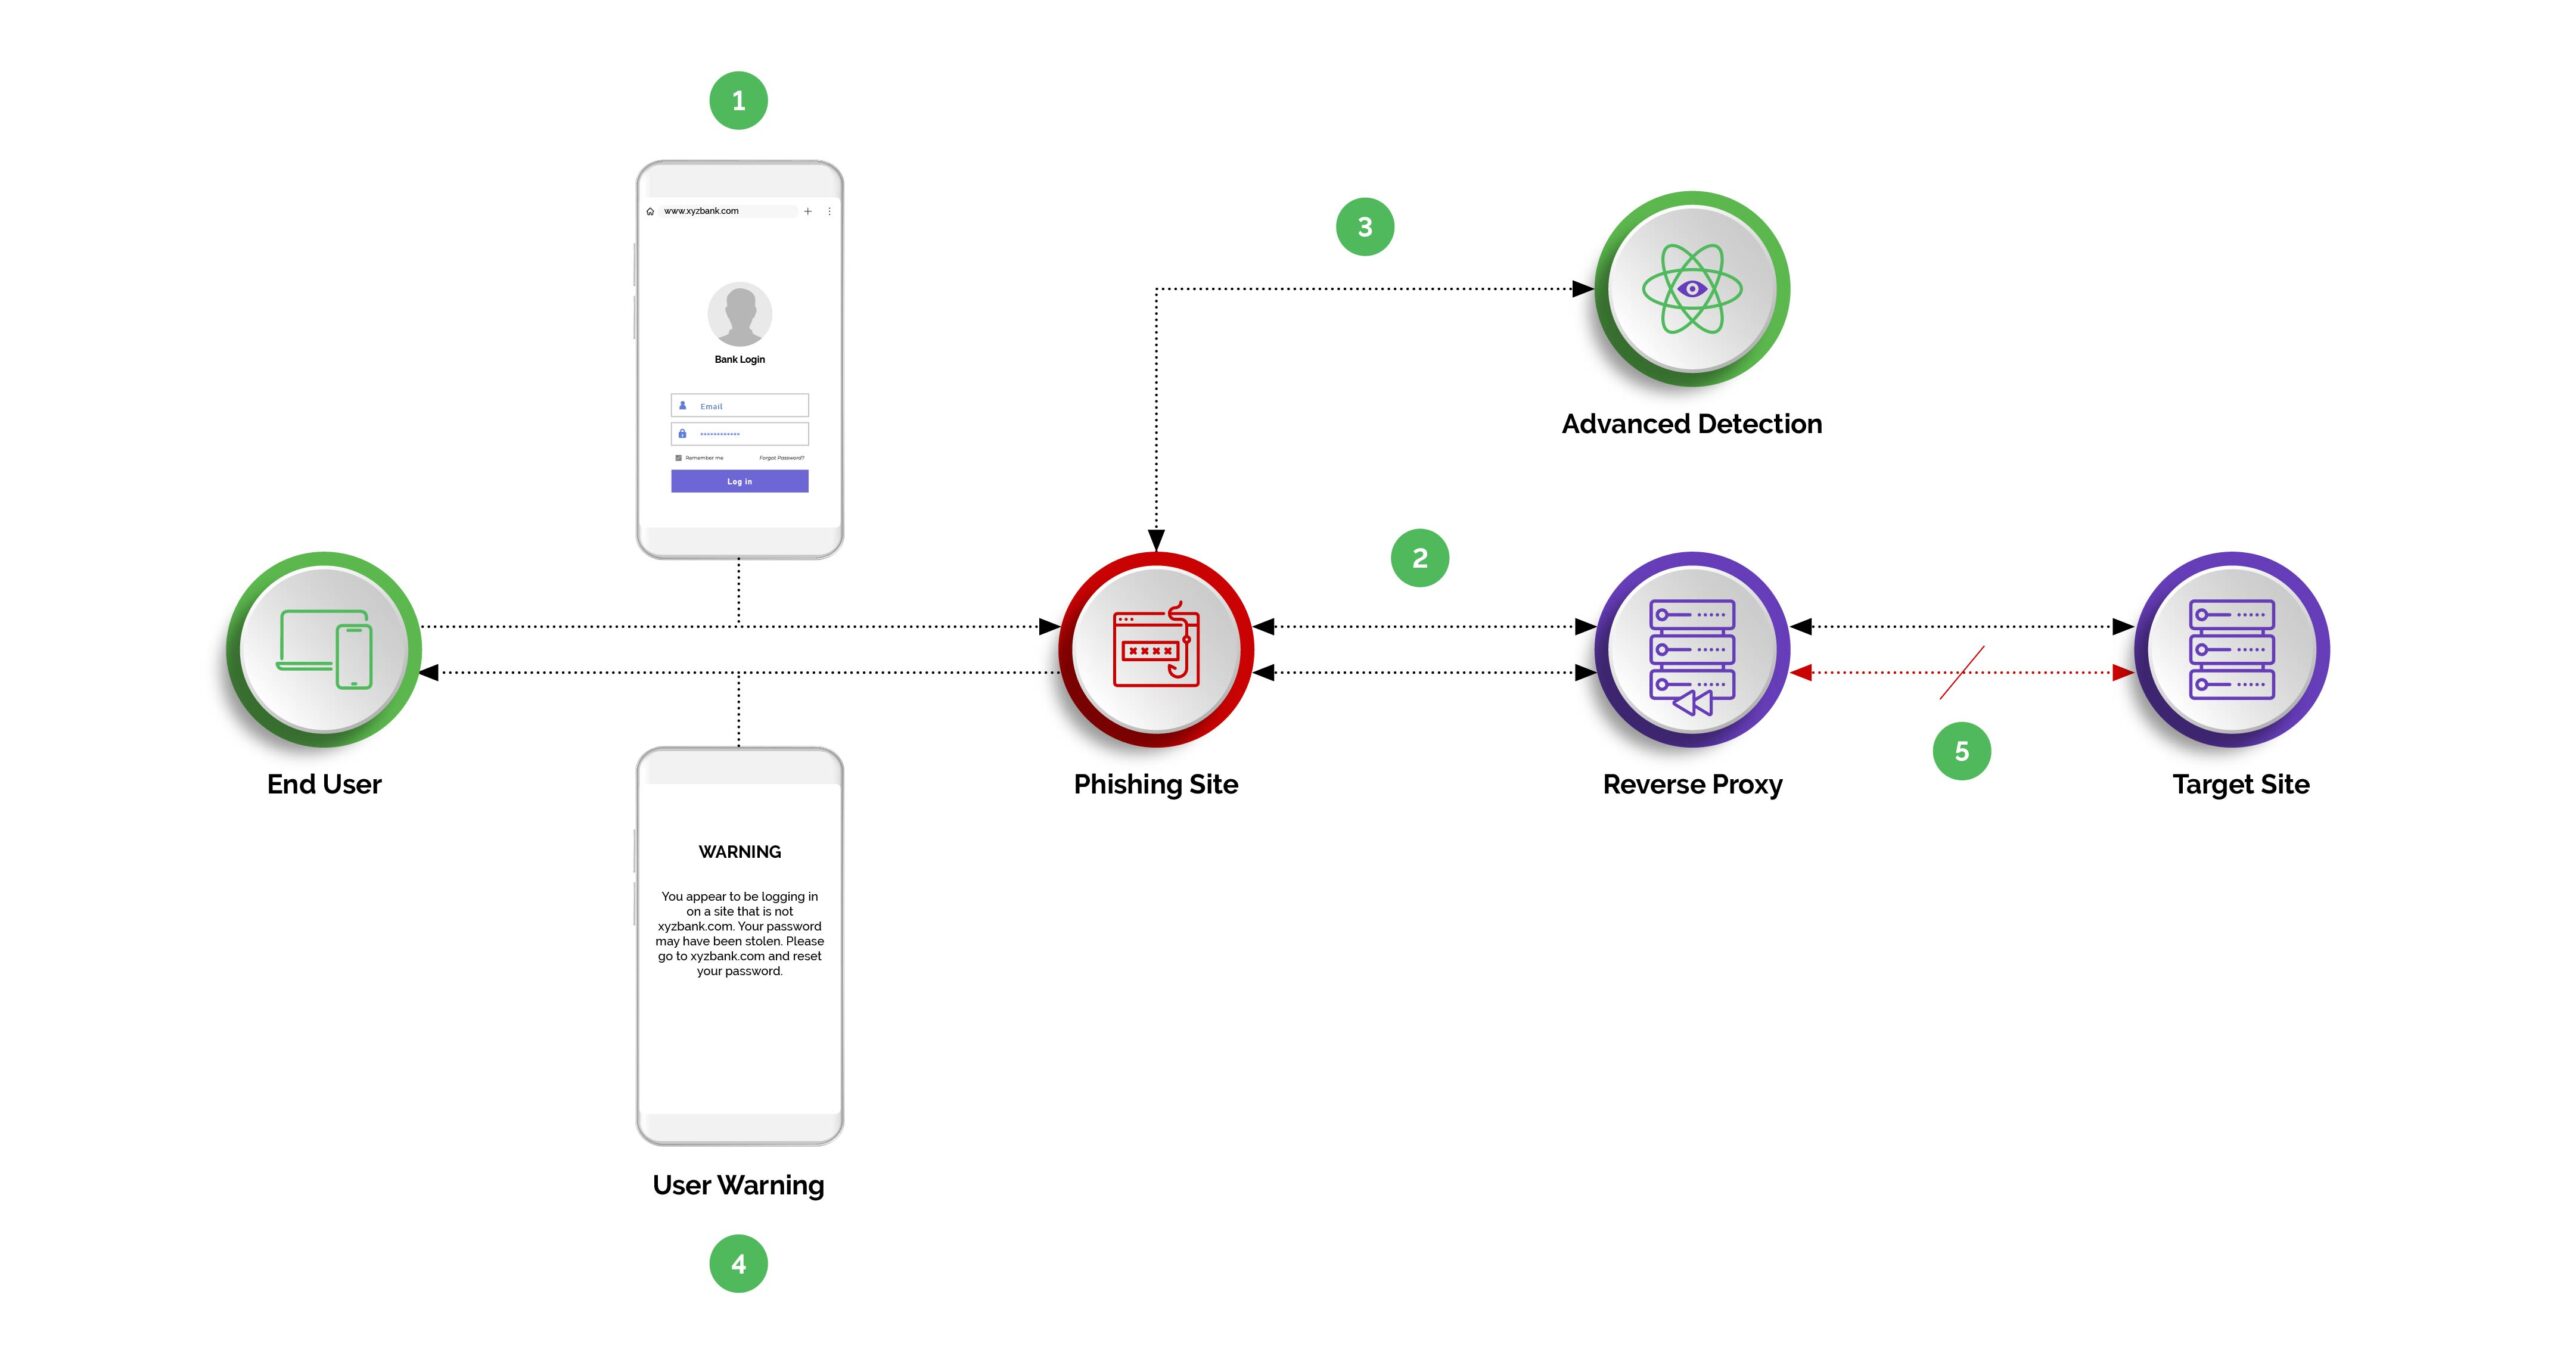 Diagram depicting a reverse proxy phishing attack with Arkose Protect